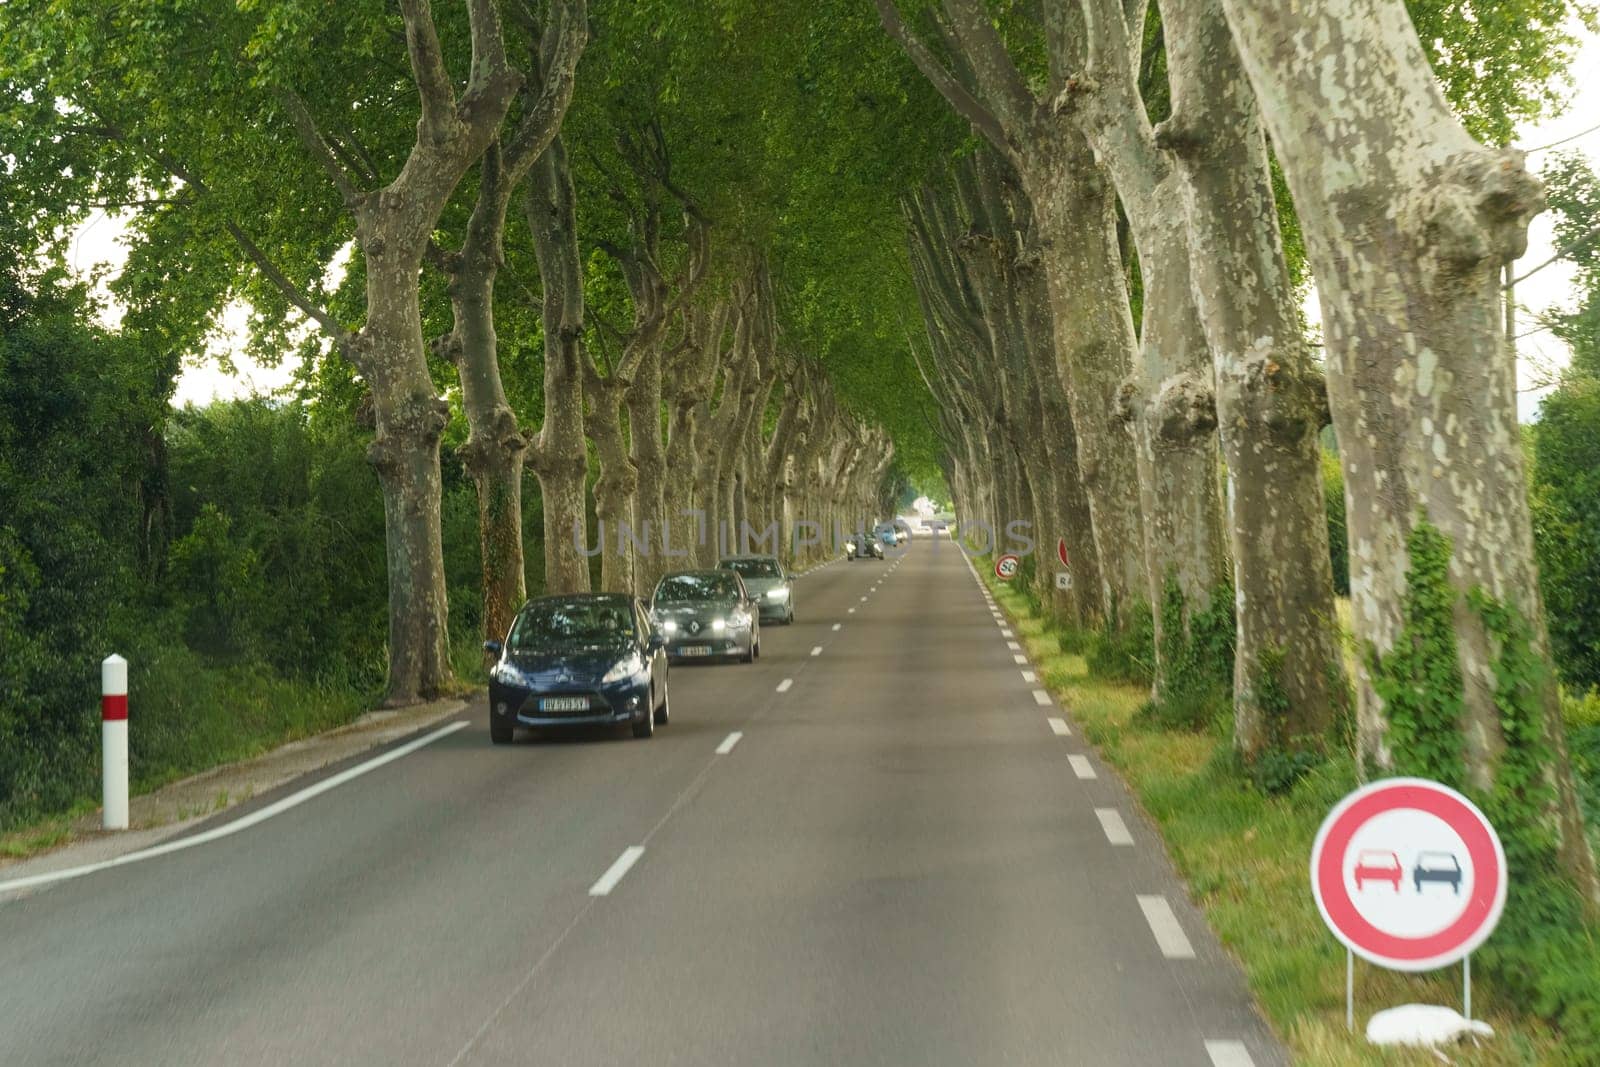 Serene Tree-Lined Road With Cars and No Overtaking Sign by Sd28DimoN_1976